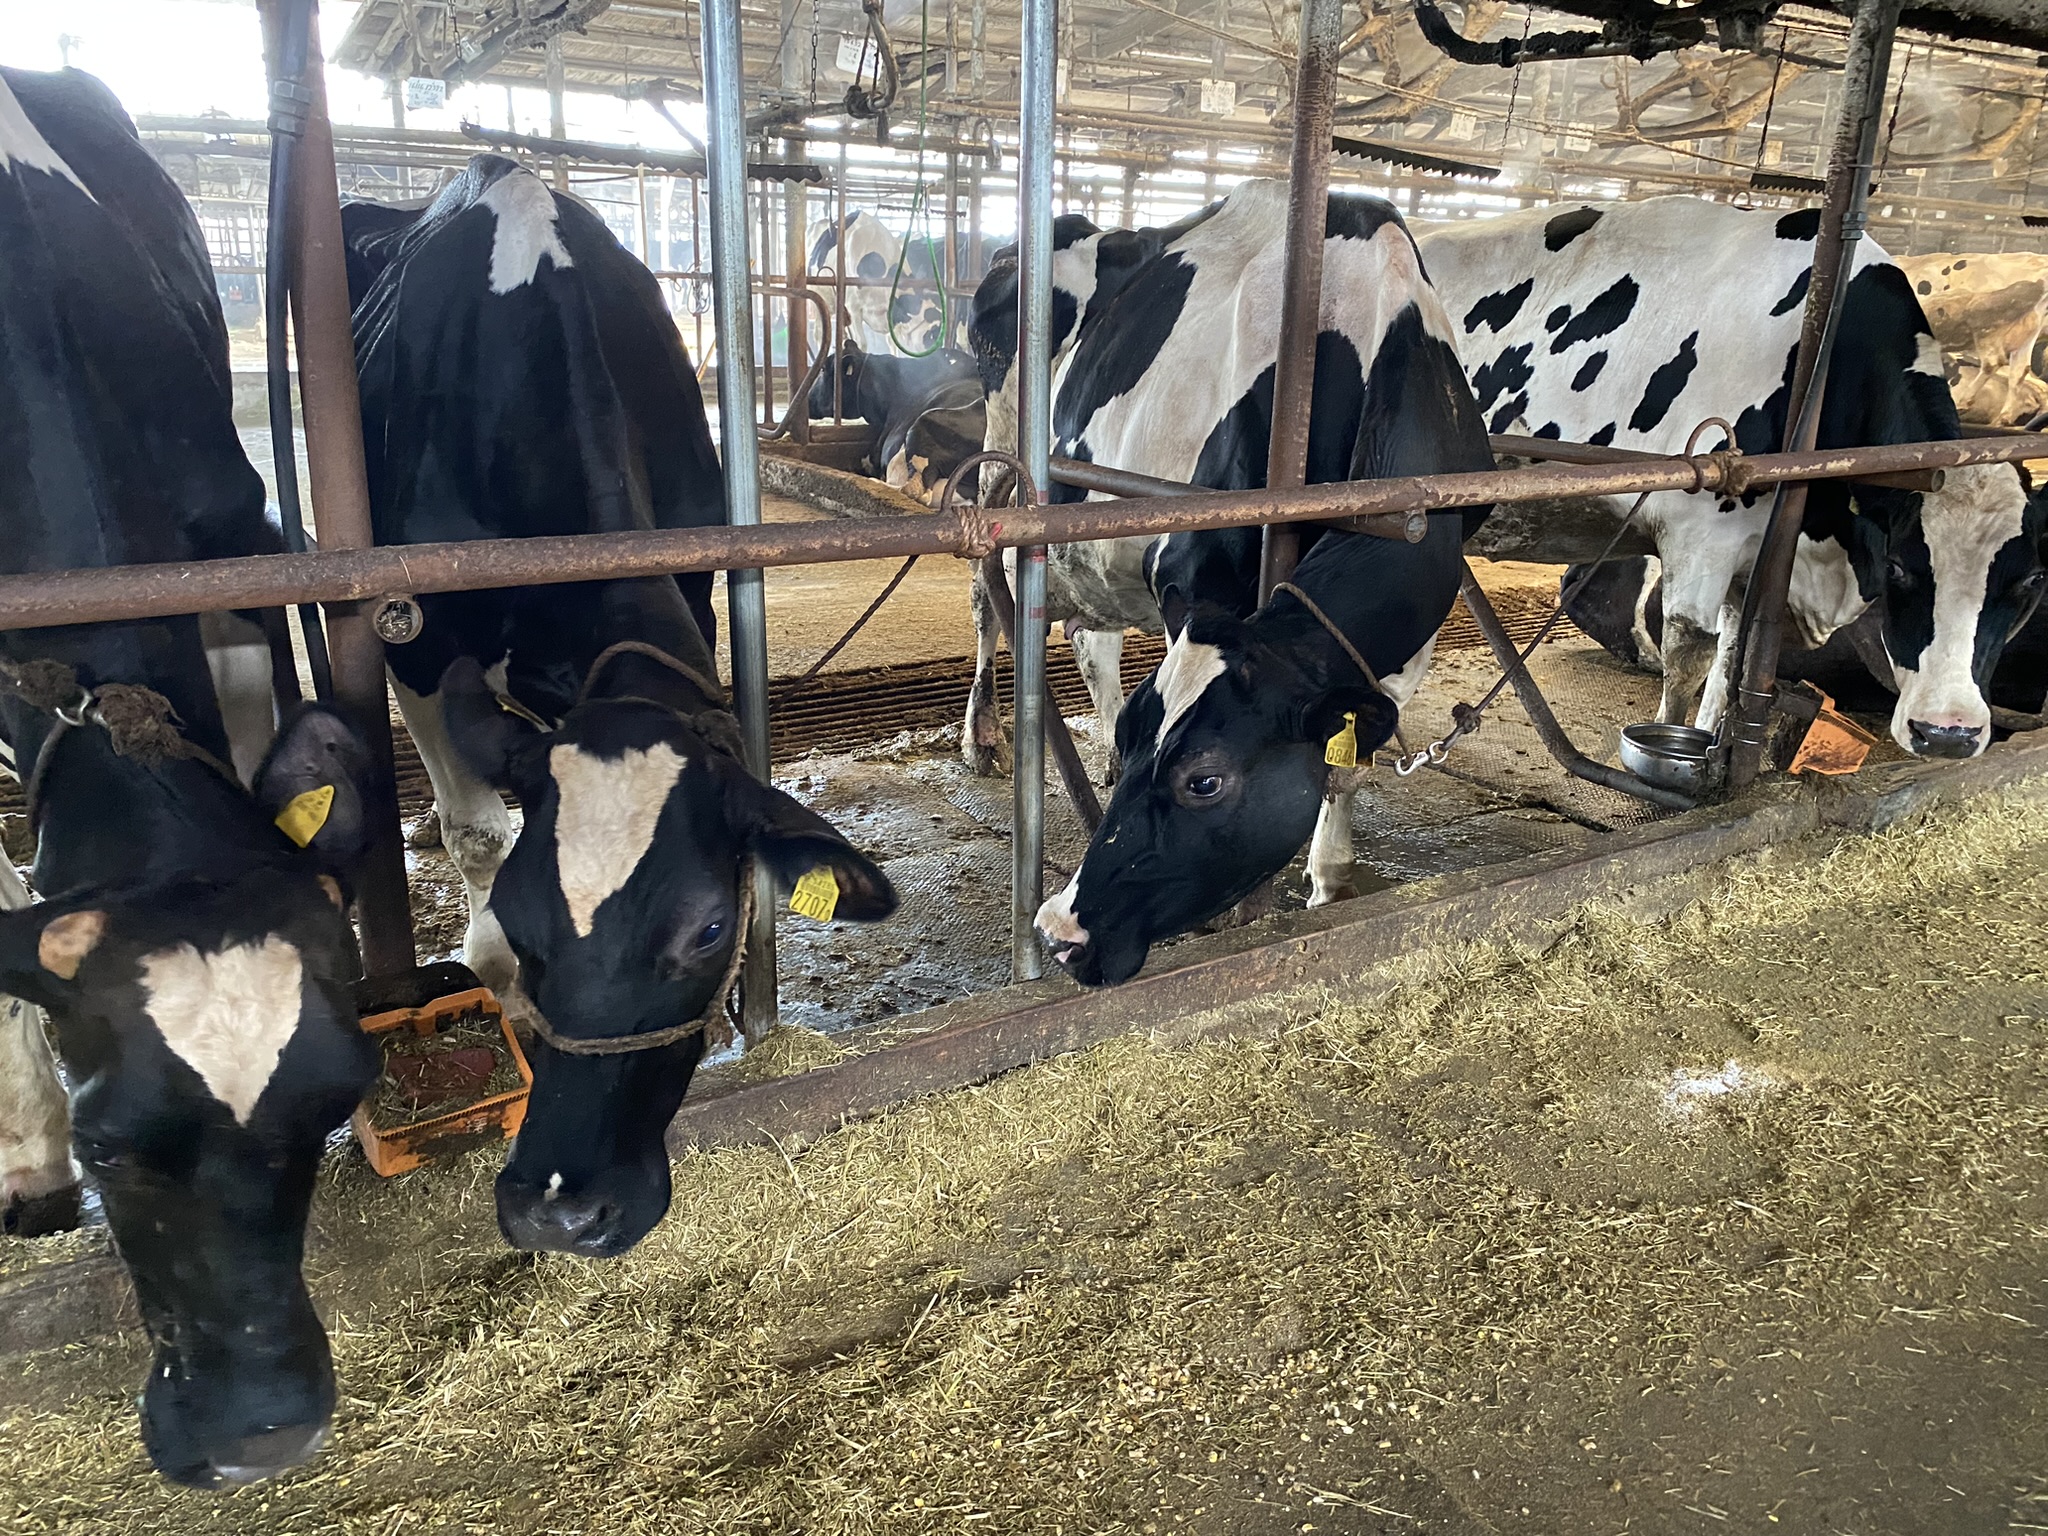 Delicious EM Milk, Less Stress for Cows II